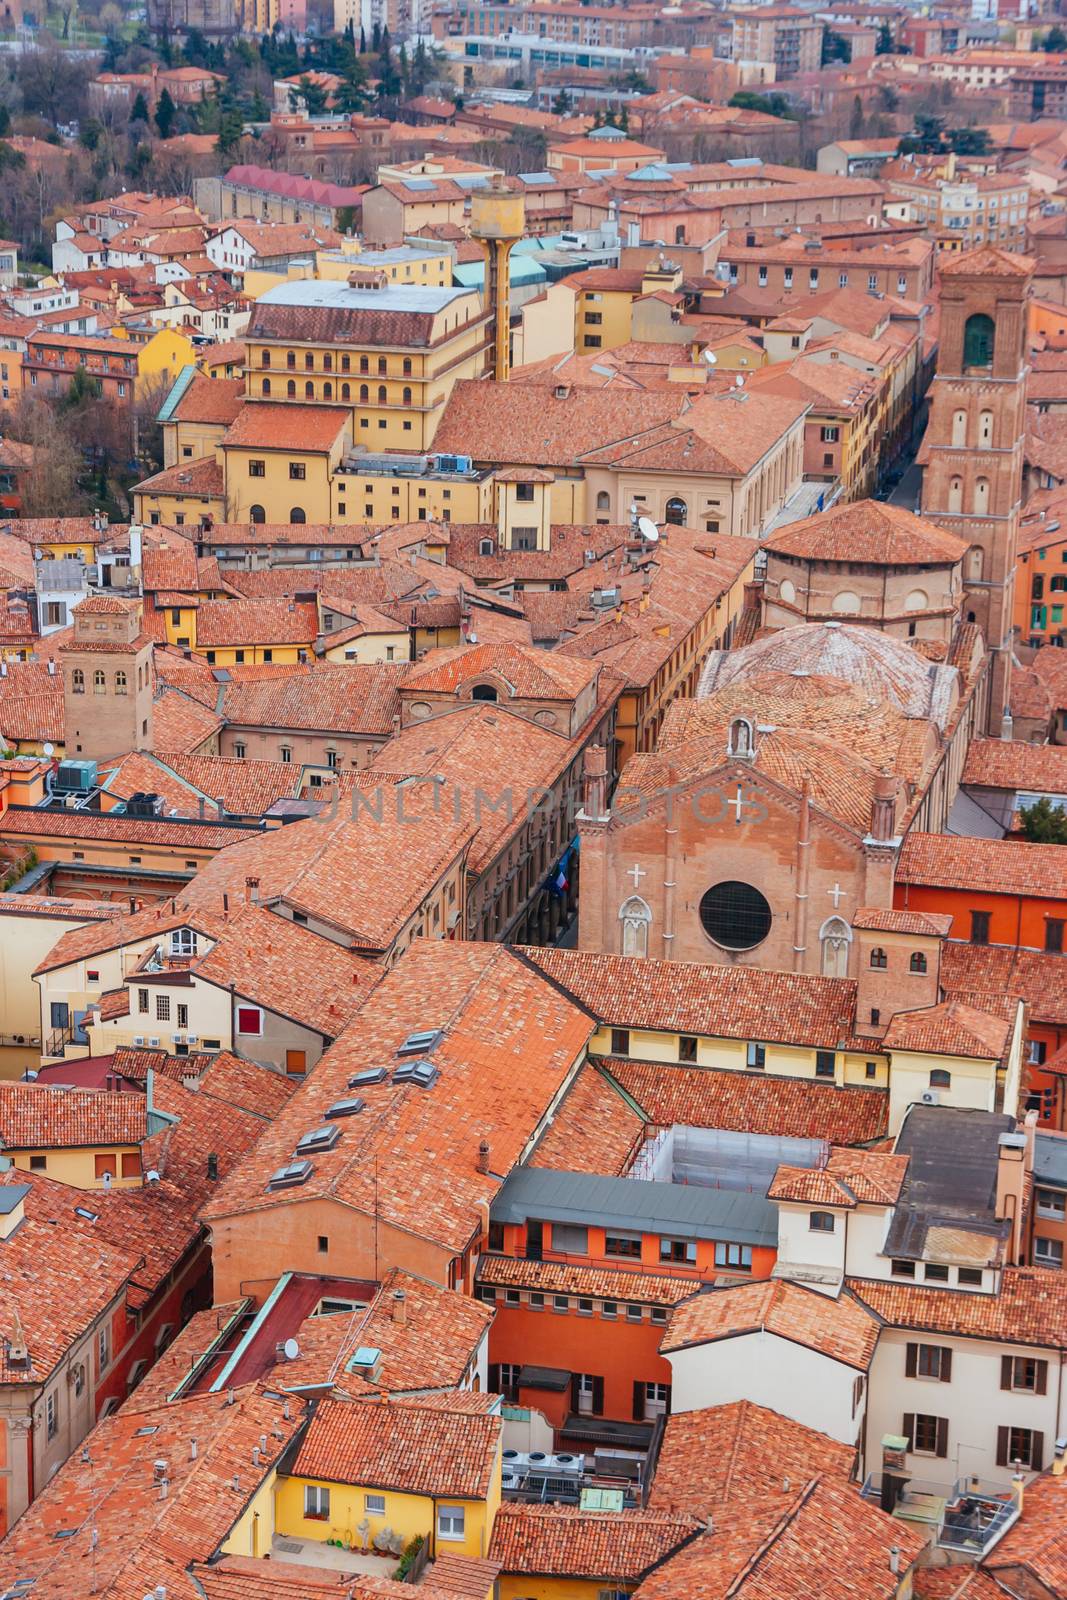 An aerial view across the beautiful town of Bologna in Italy.